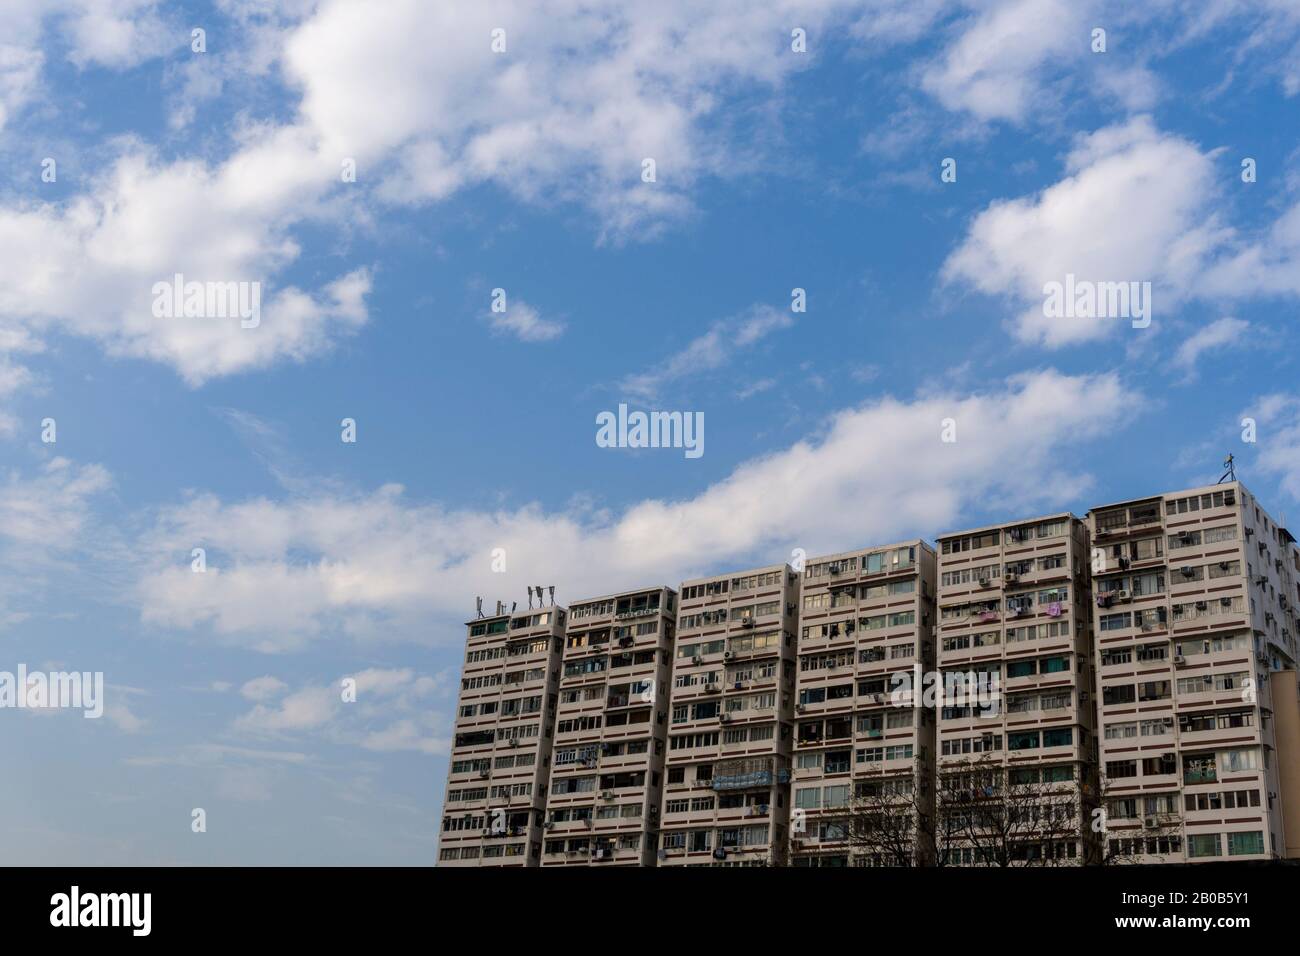 Hong Kong - January 12 2020 : Man Wah Sun Chuen, one of the oldest private housing estates in Hong Kong built in 1960s Stock Photo